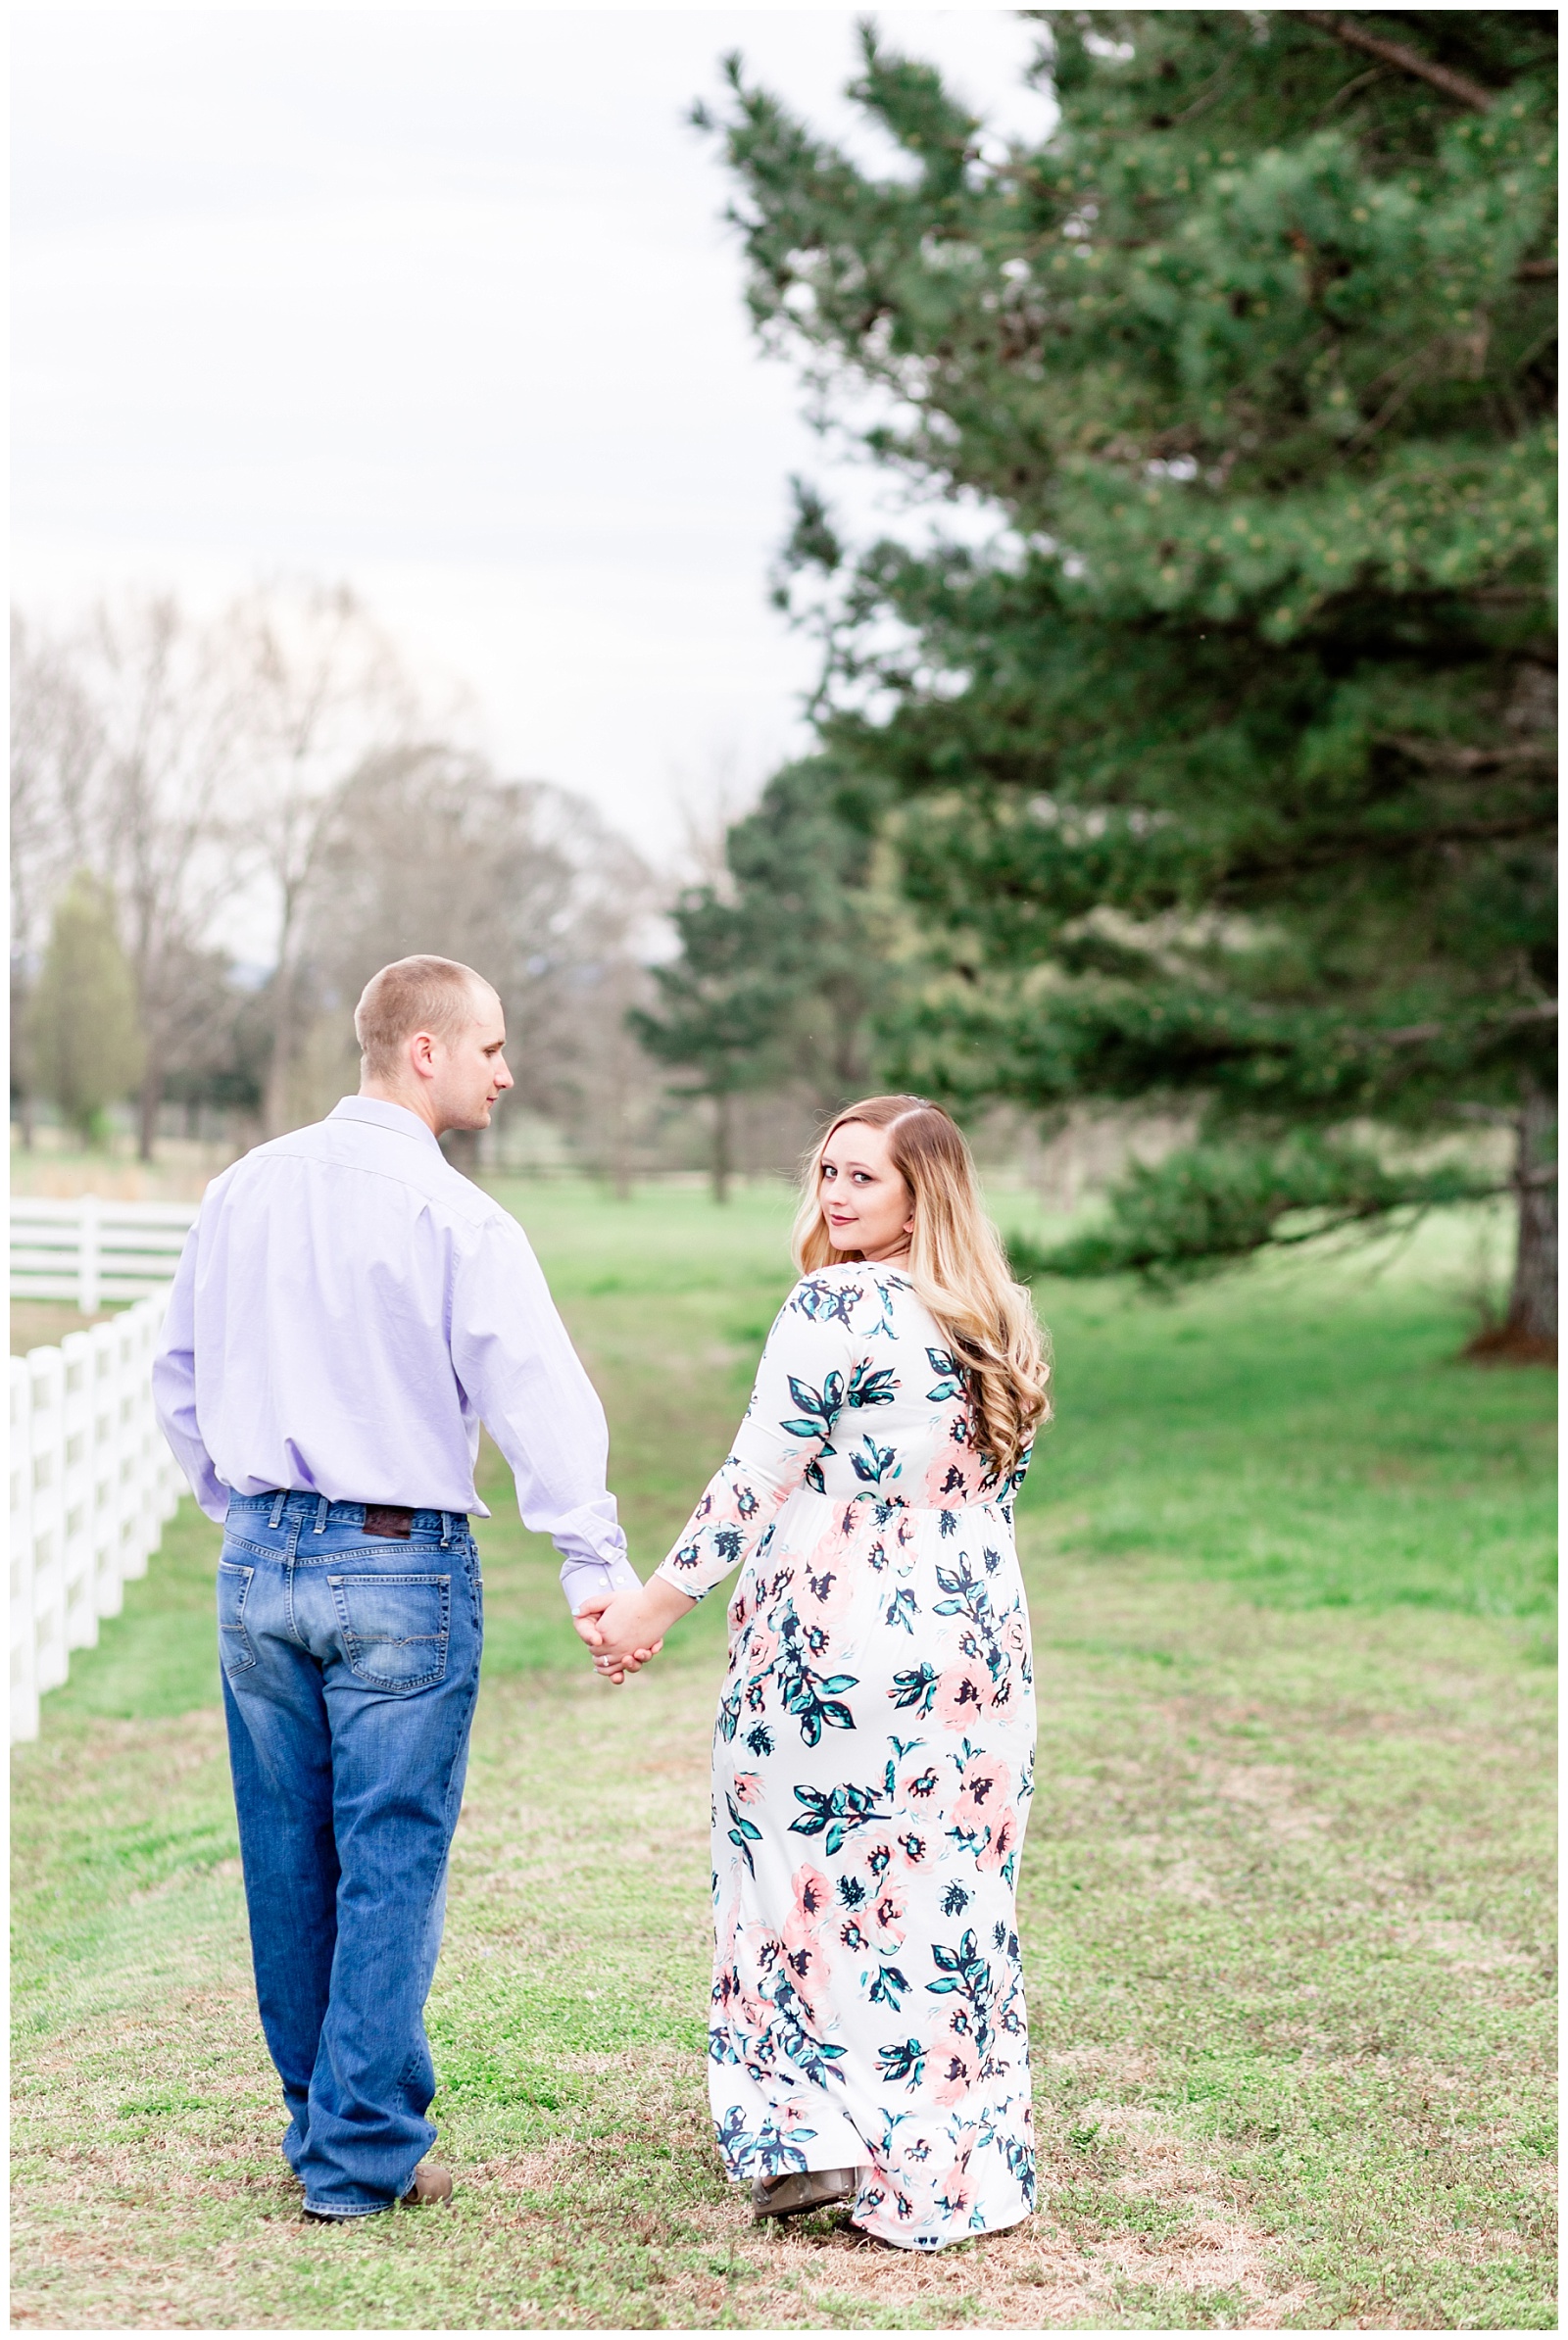 Southern Farm Engagement Session with Pastel and Floral Outfits